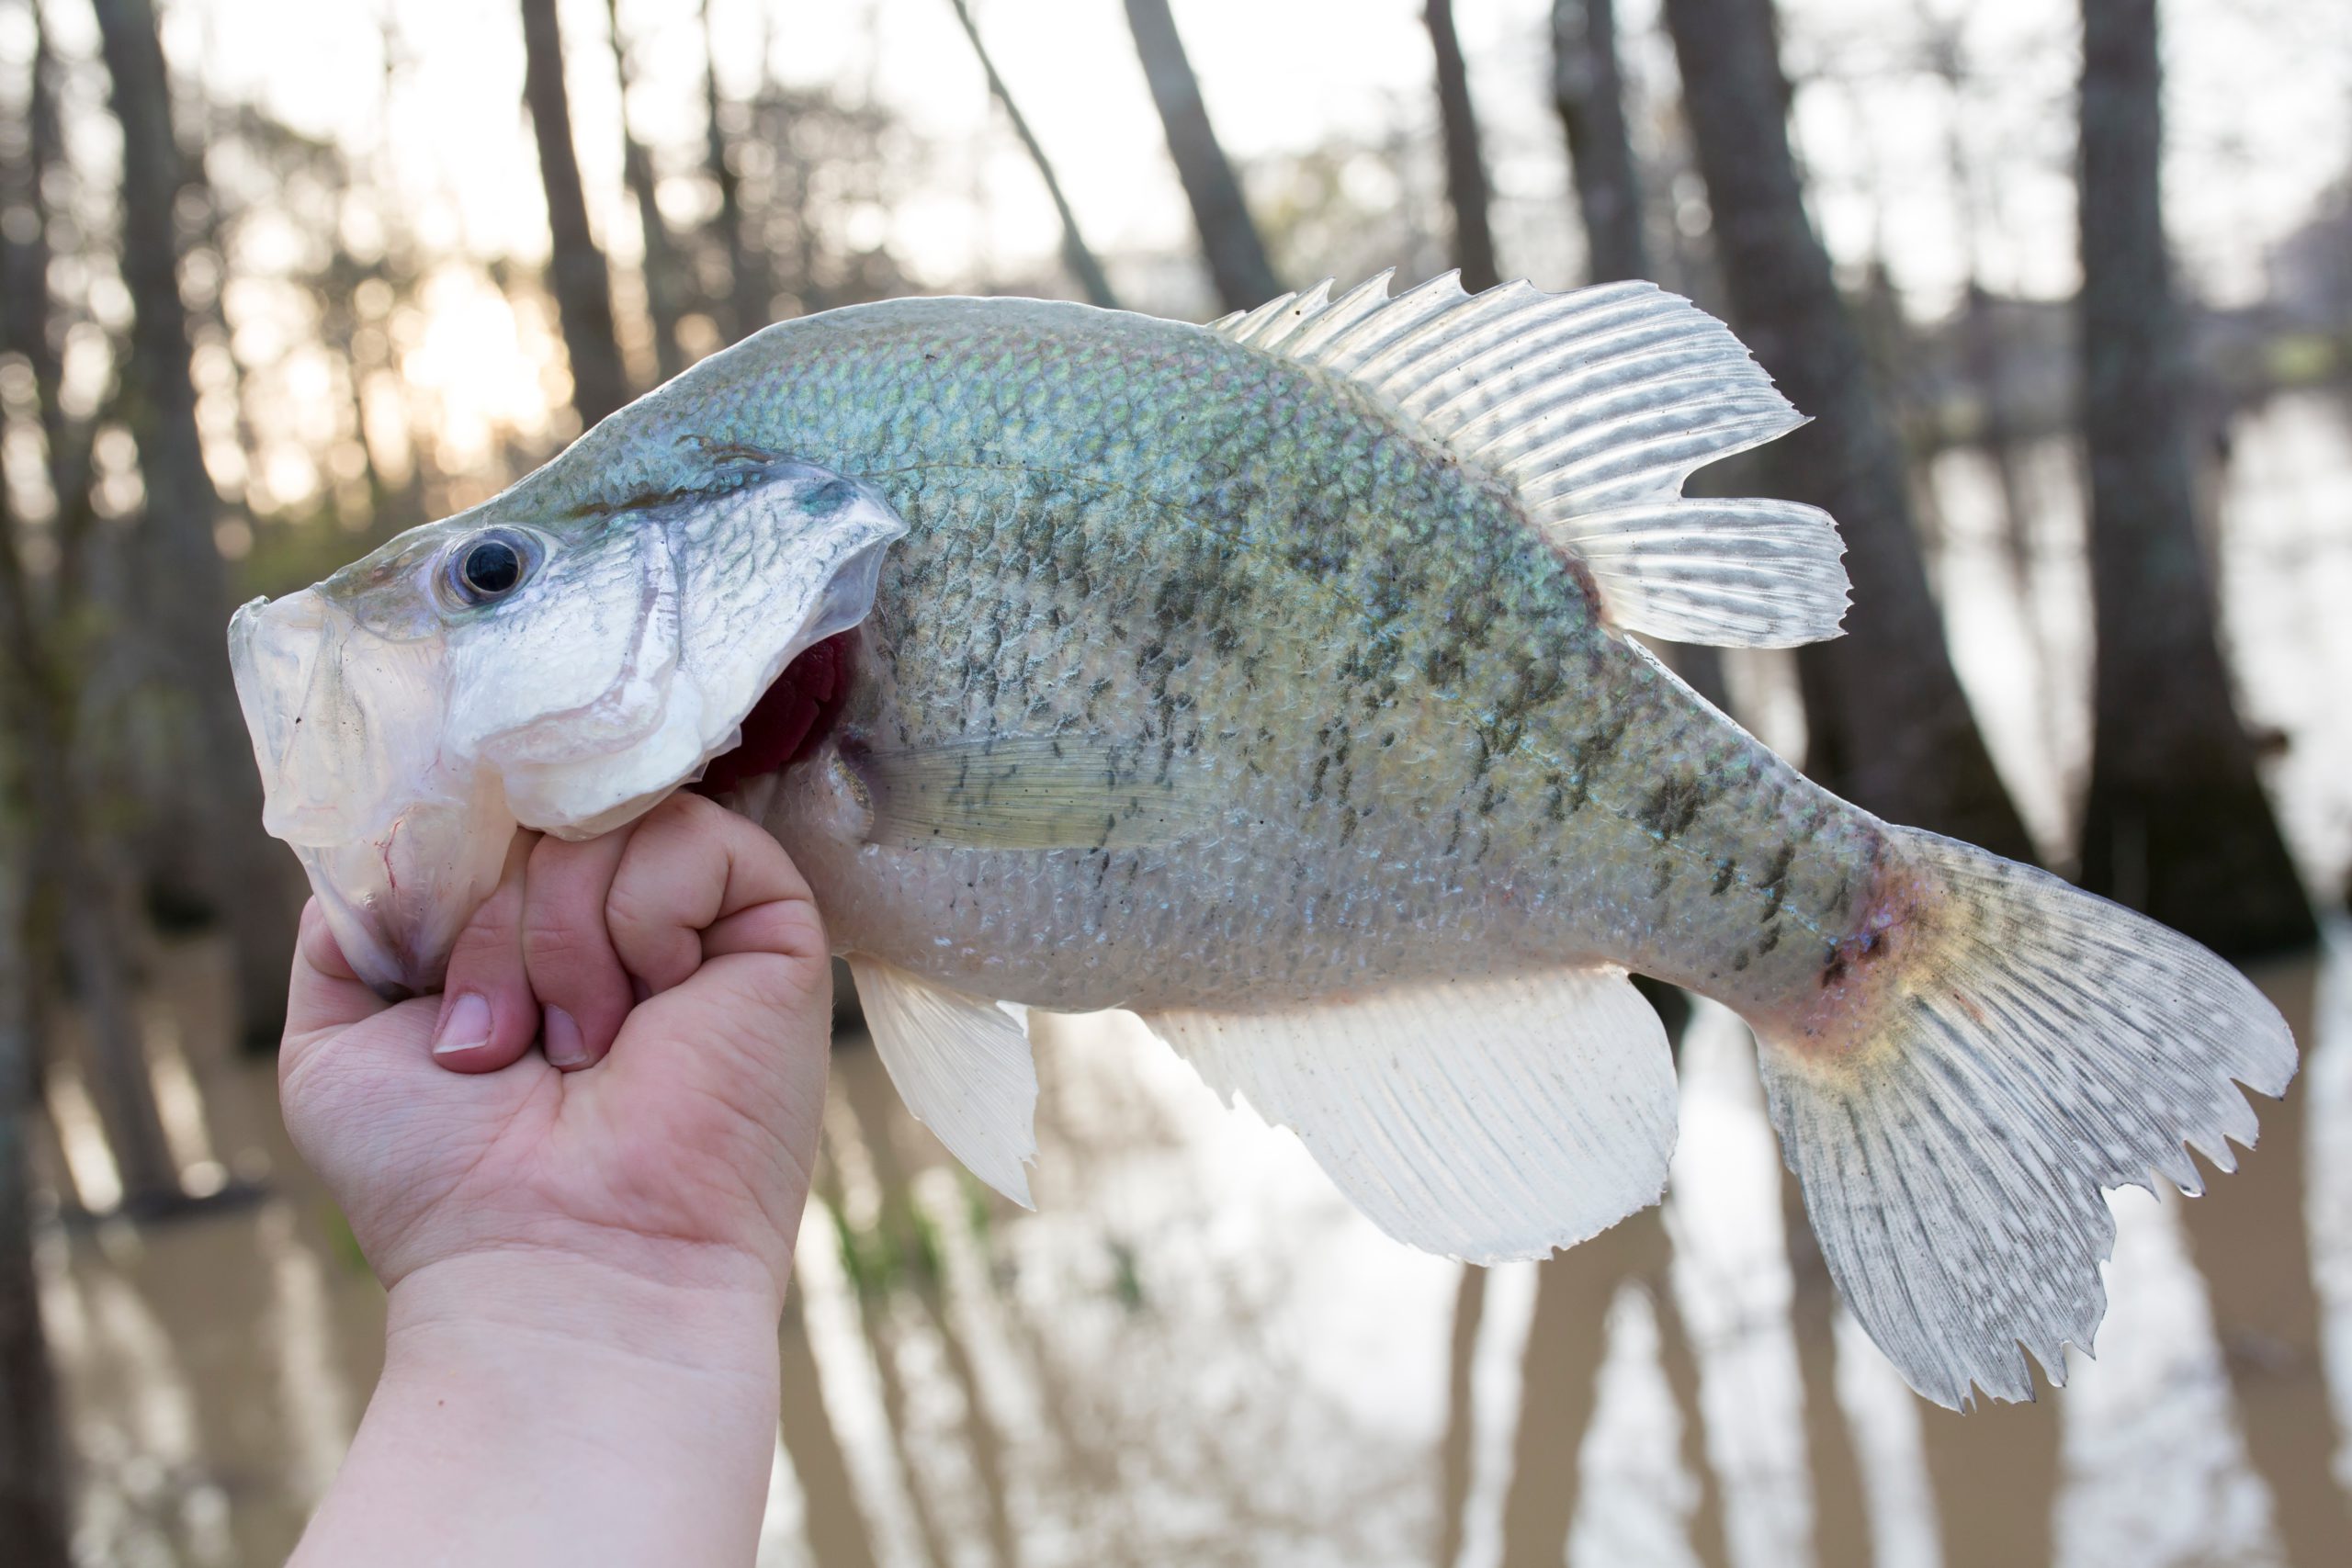 Crappie with a fly lure in its mouth being held by an angler.